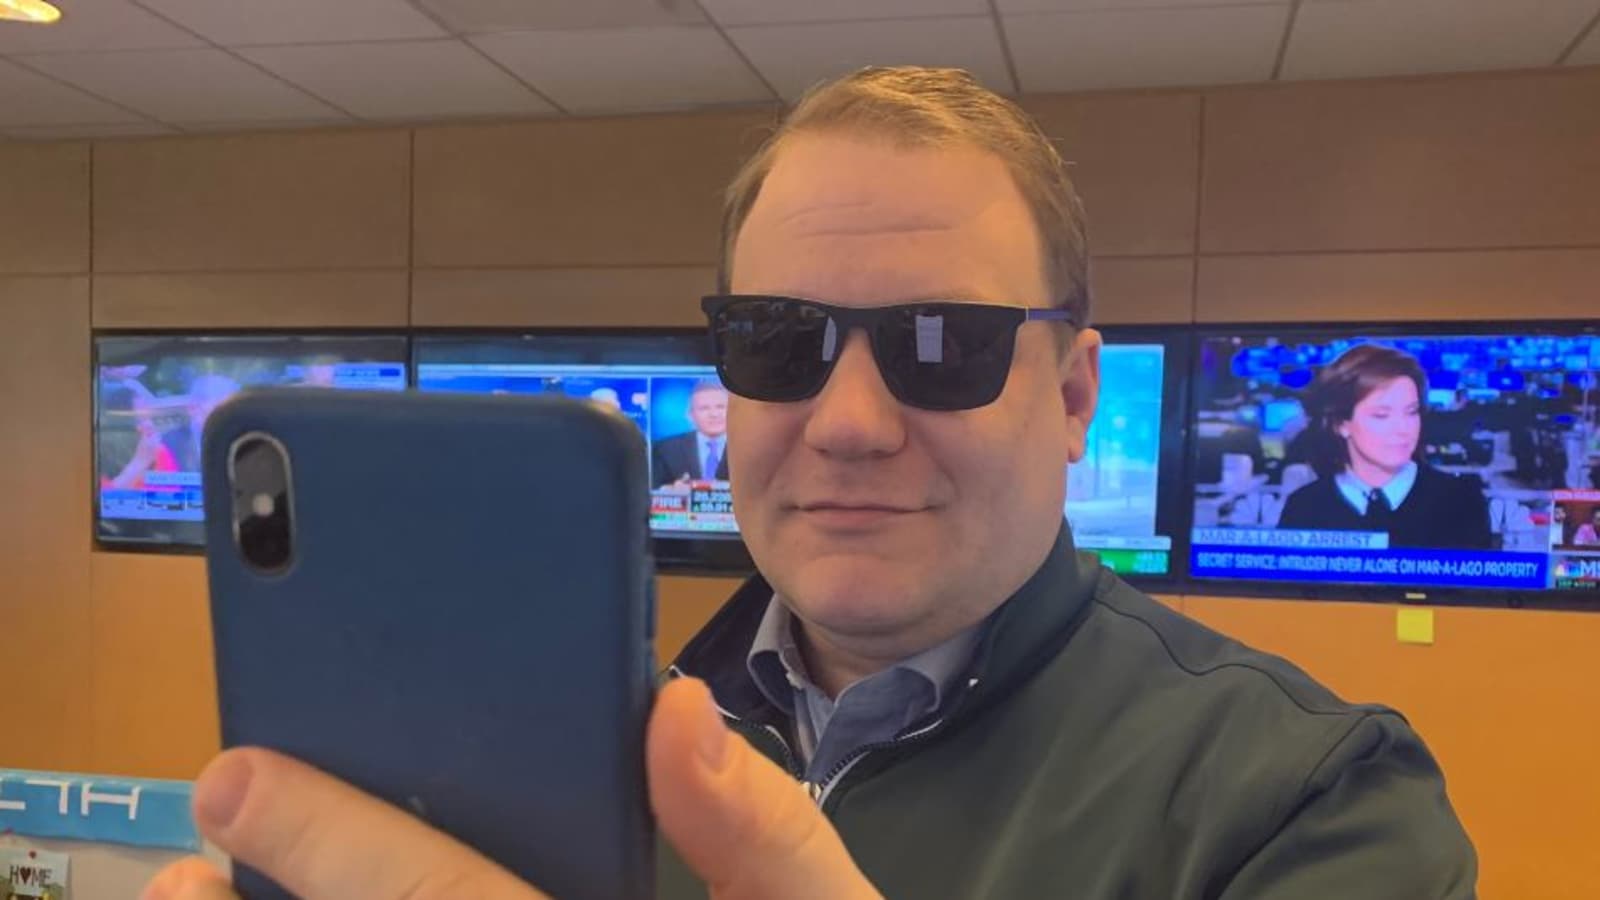 How do you set Face ID with sunglasses?